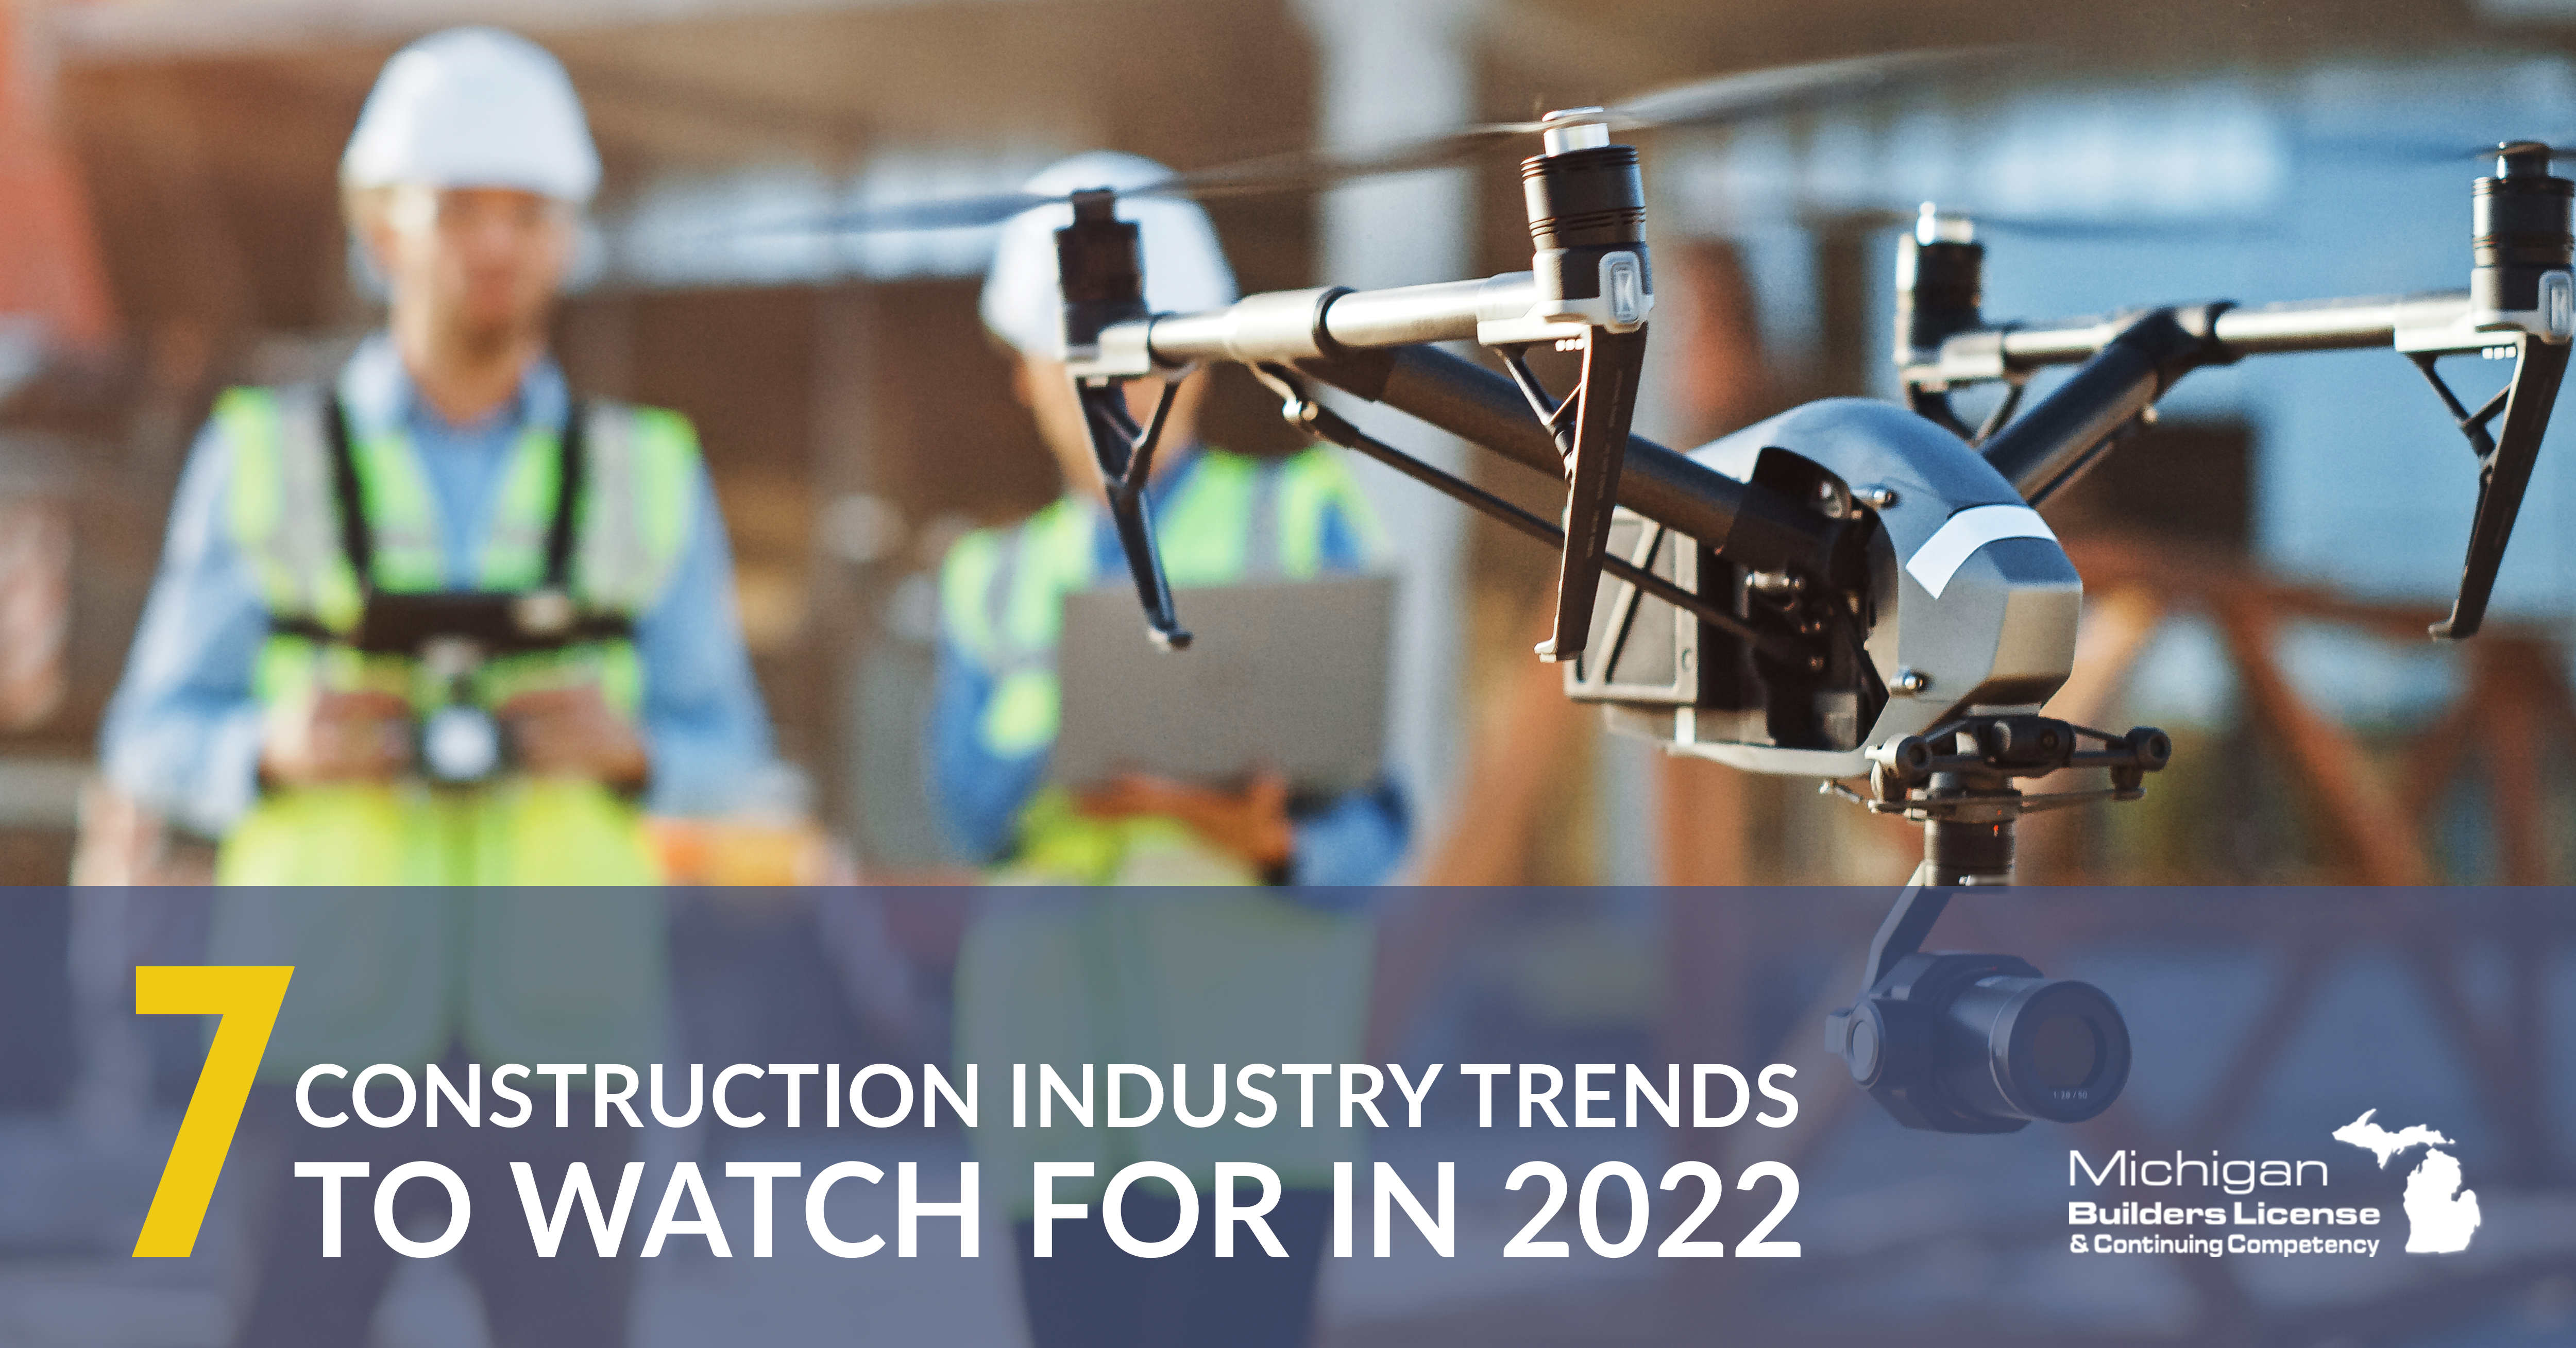 7 Construction Industry Trends to Watch For in 2022